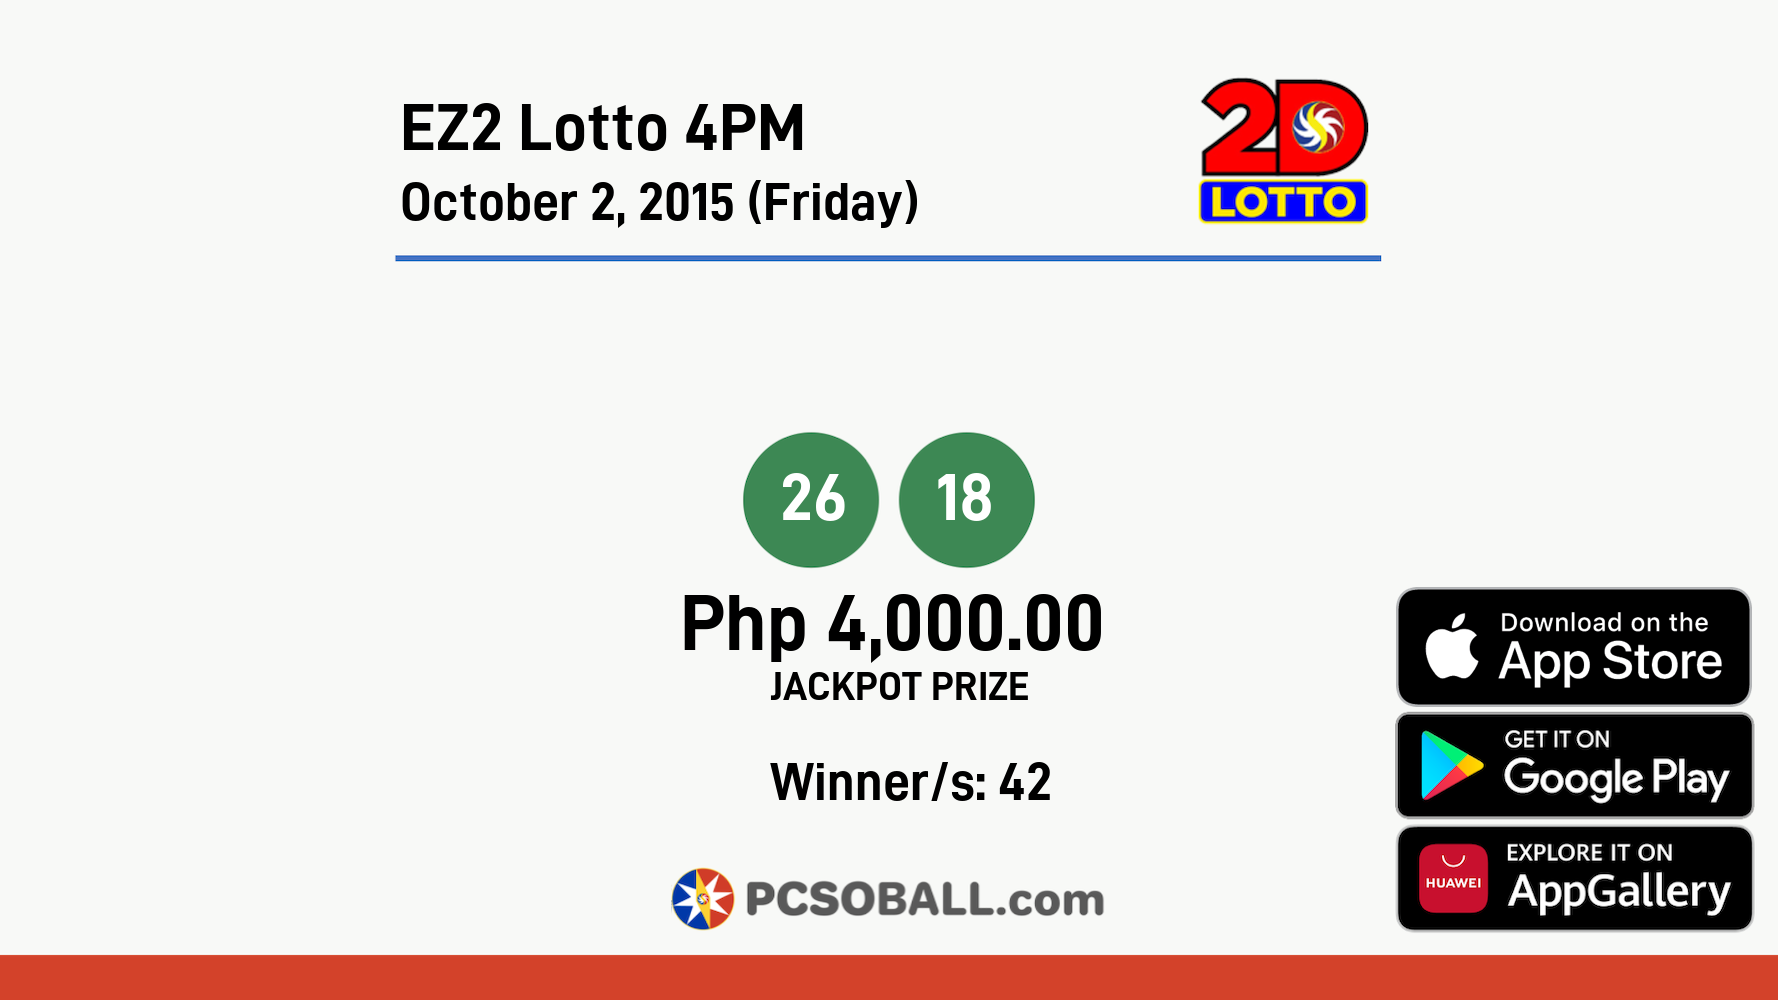 EZ2 Lotto 4PM October 2, 2015 (Friday) Result